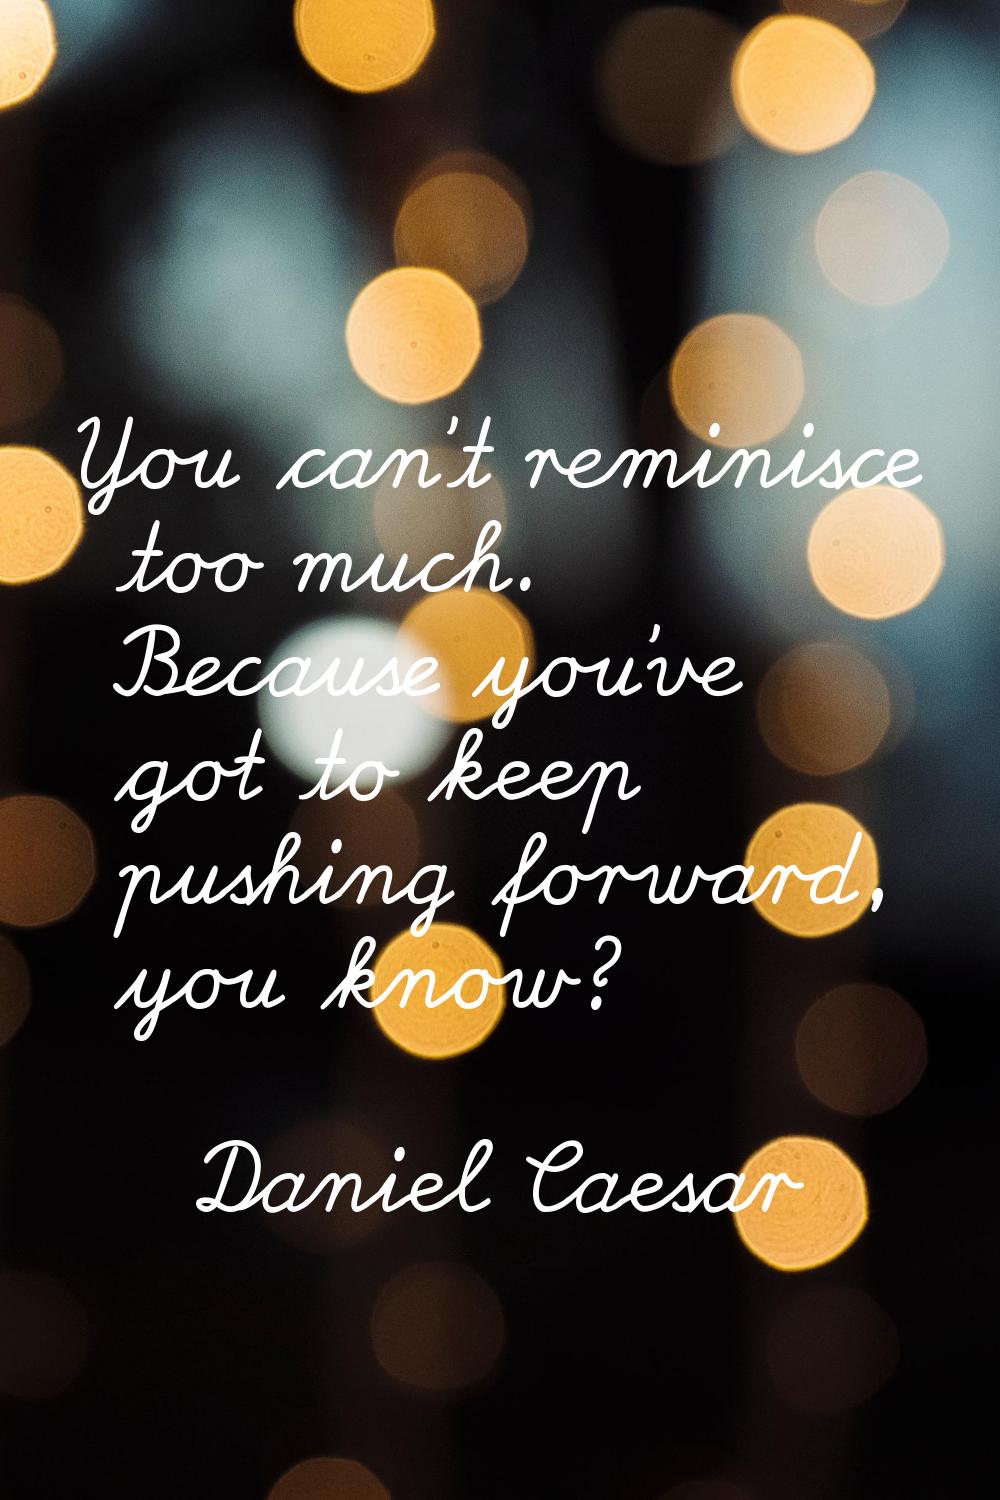 You can't reminisce too much. Because you've got to keep pushing forward, you know?